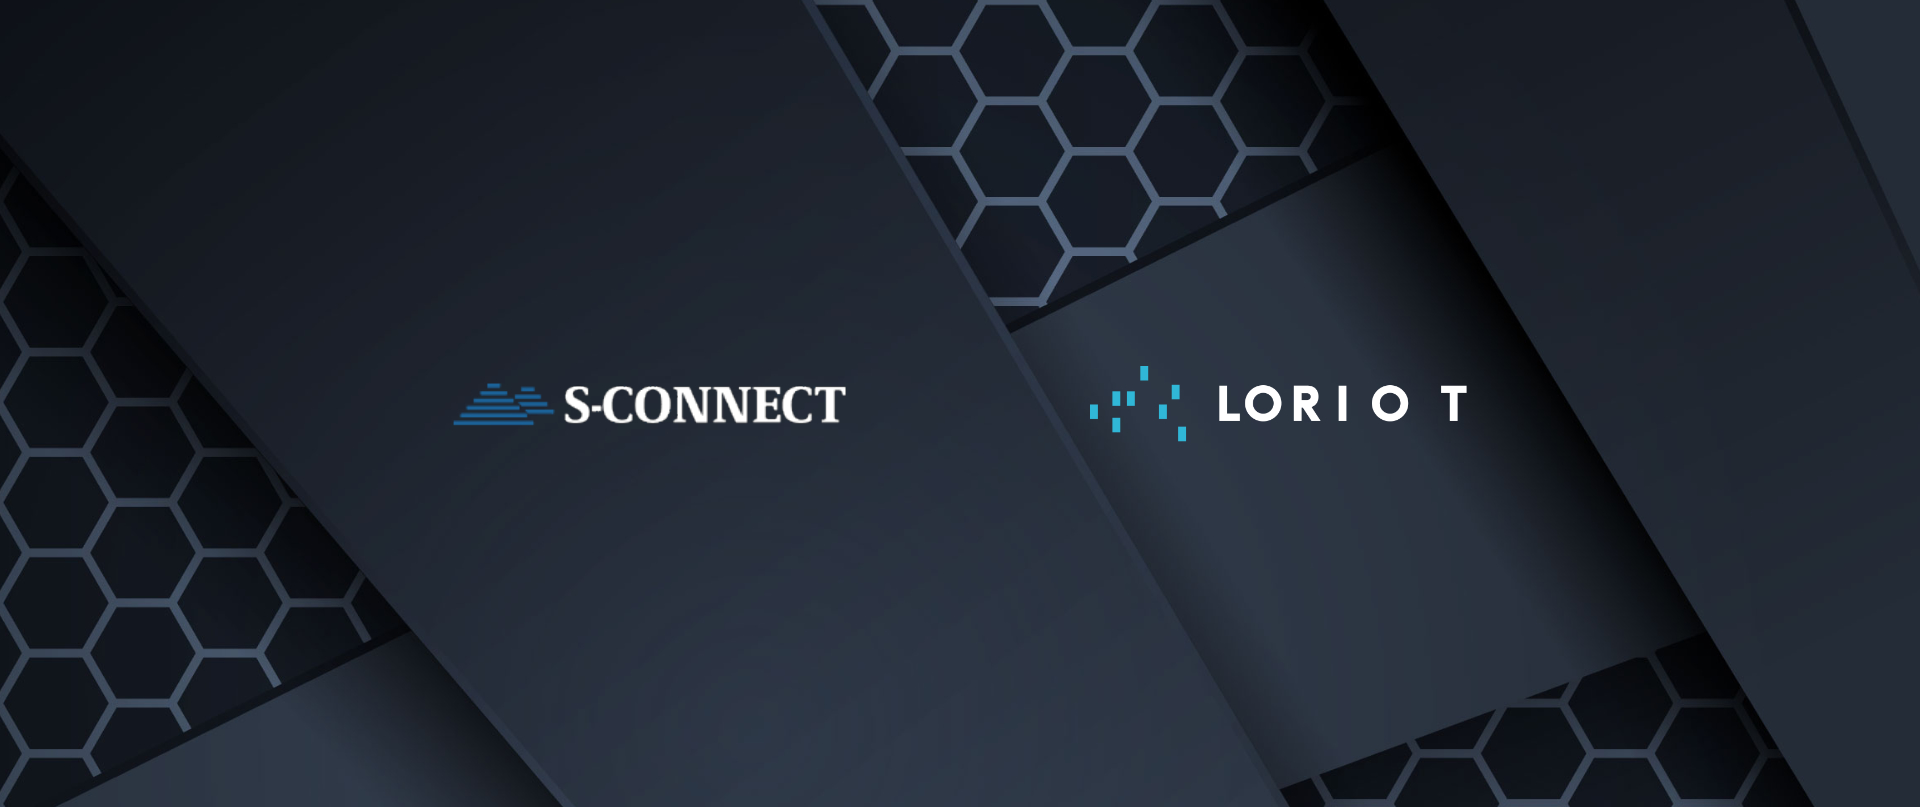 S-Connect- LORIOT